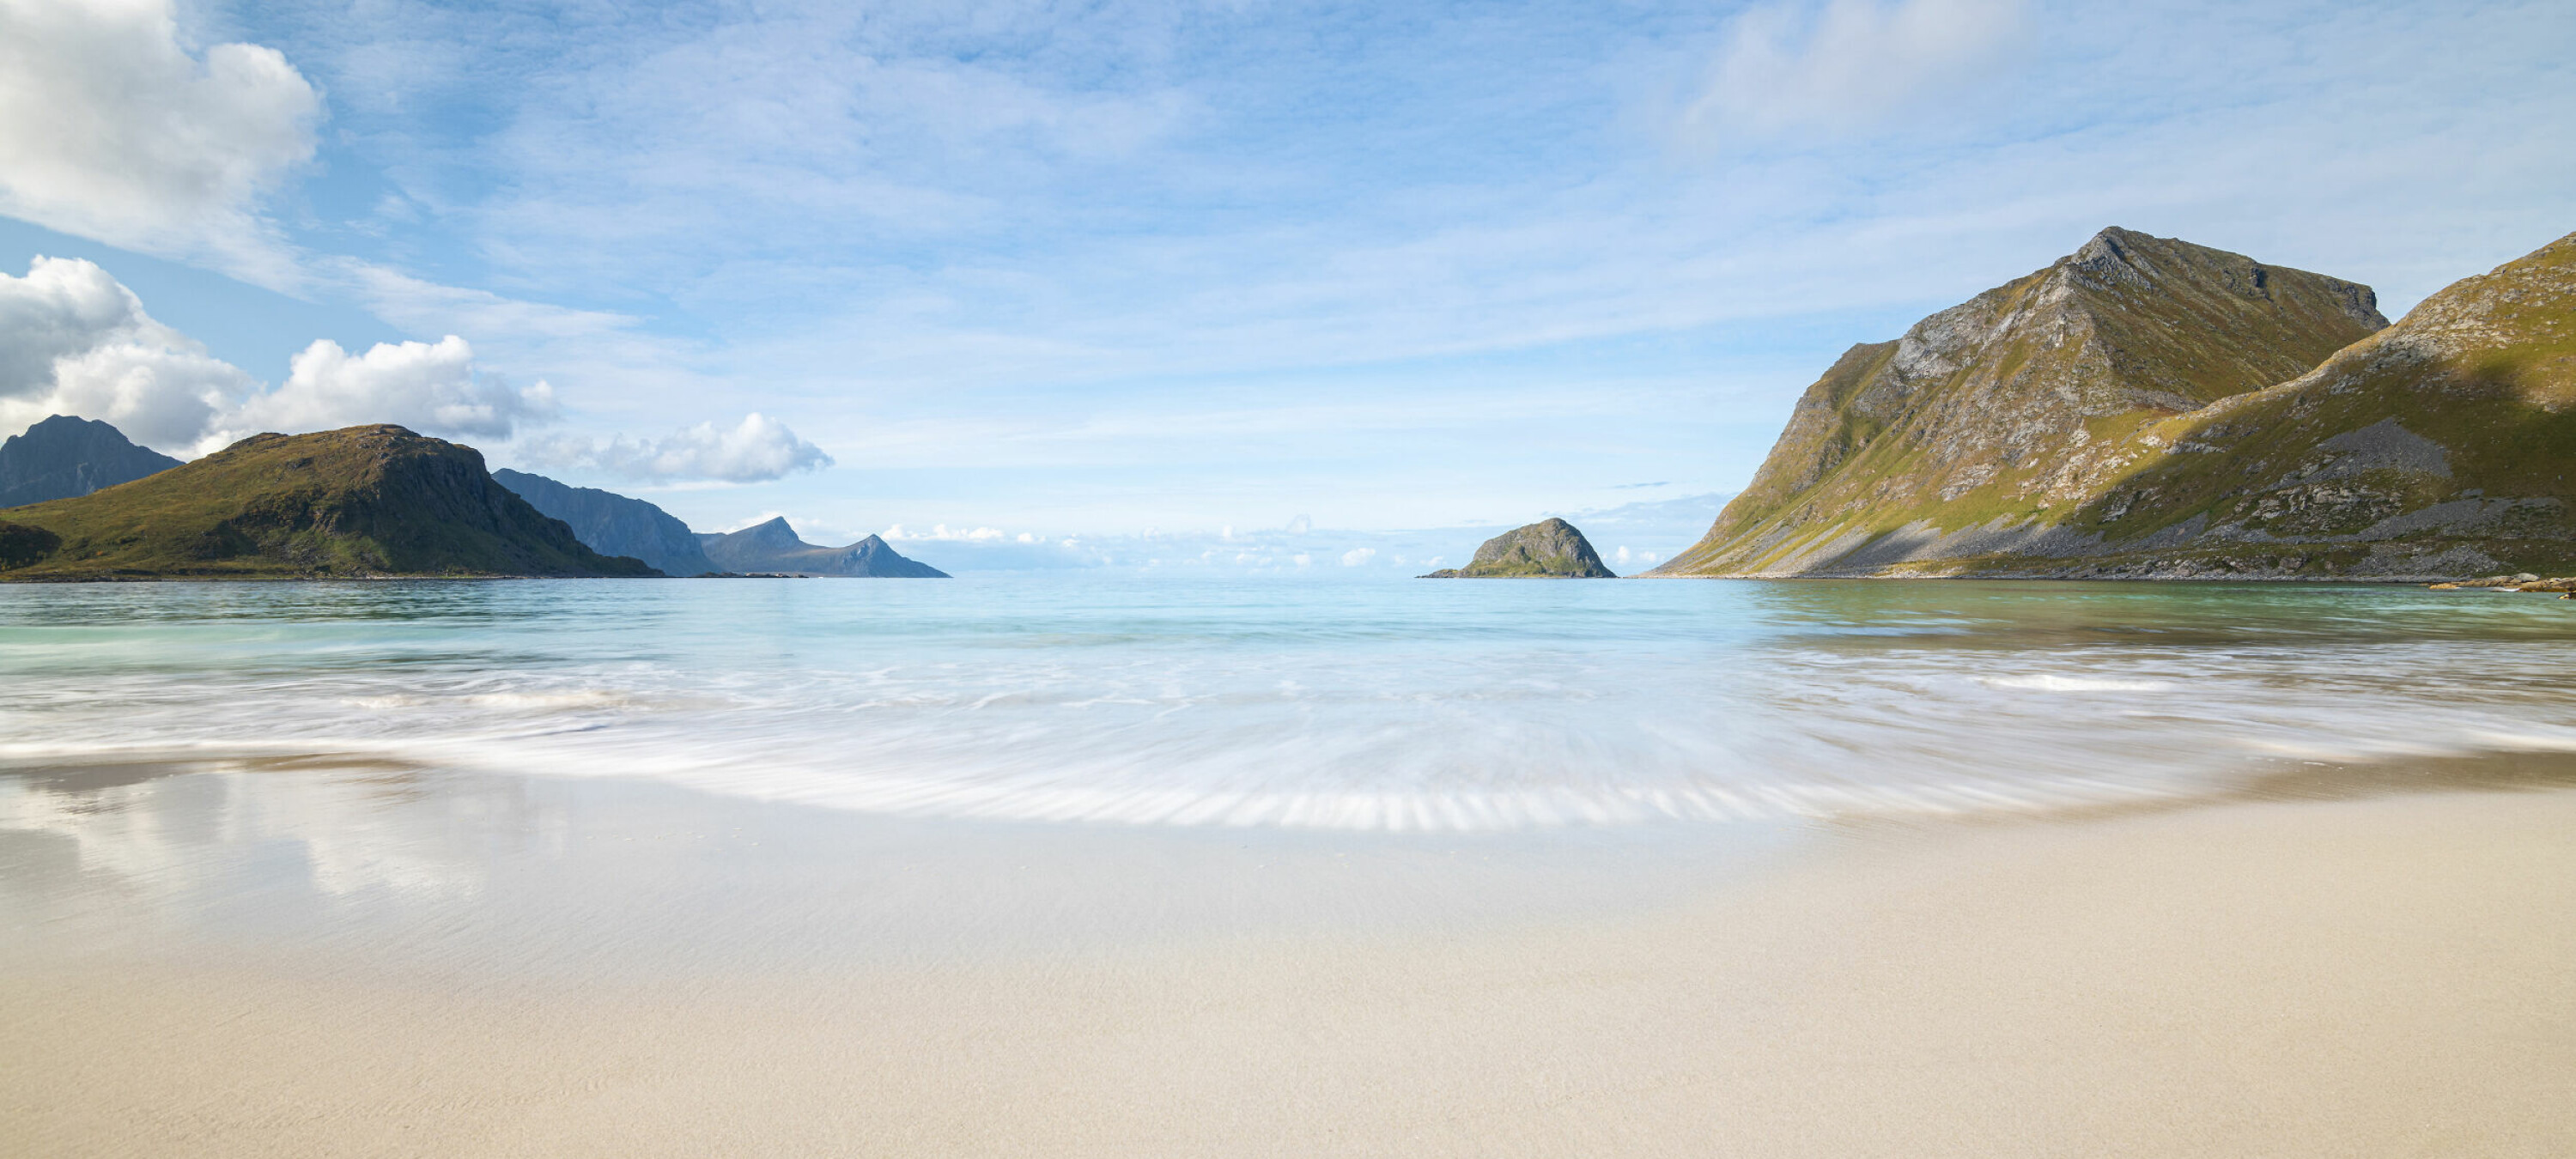 Panorama of scenic Haukland beach on Lofoten Islands in Norway on a bright summer day